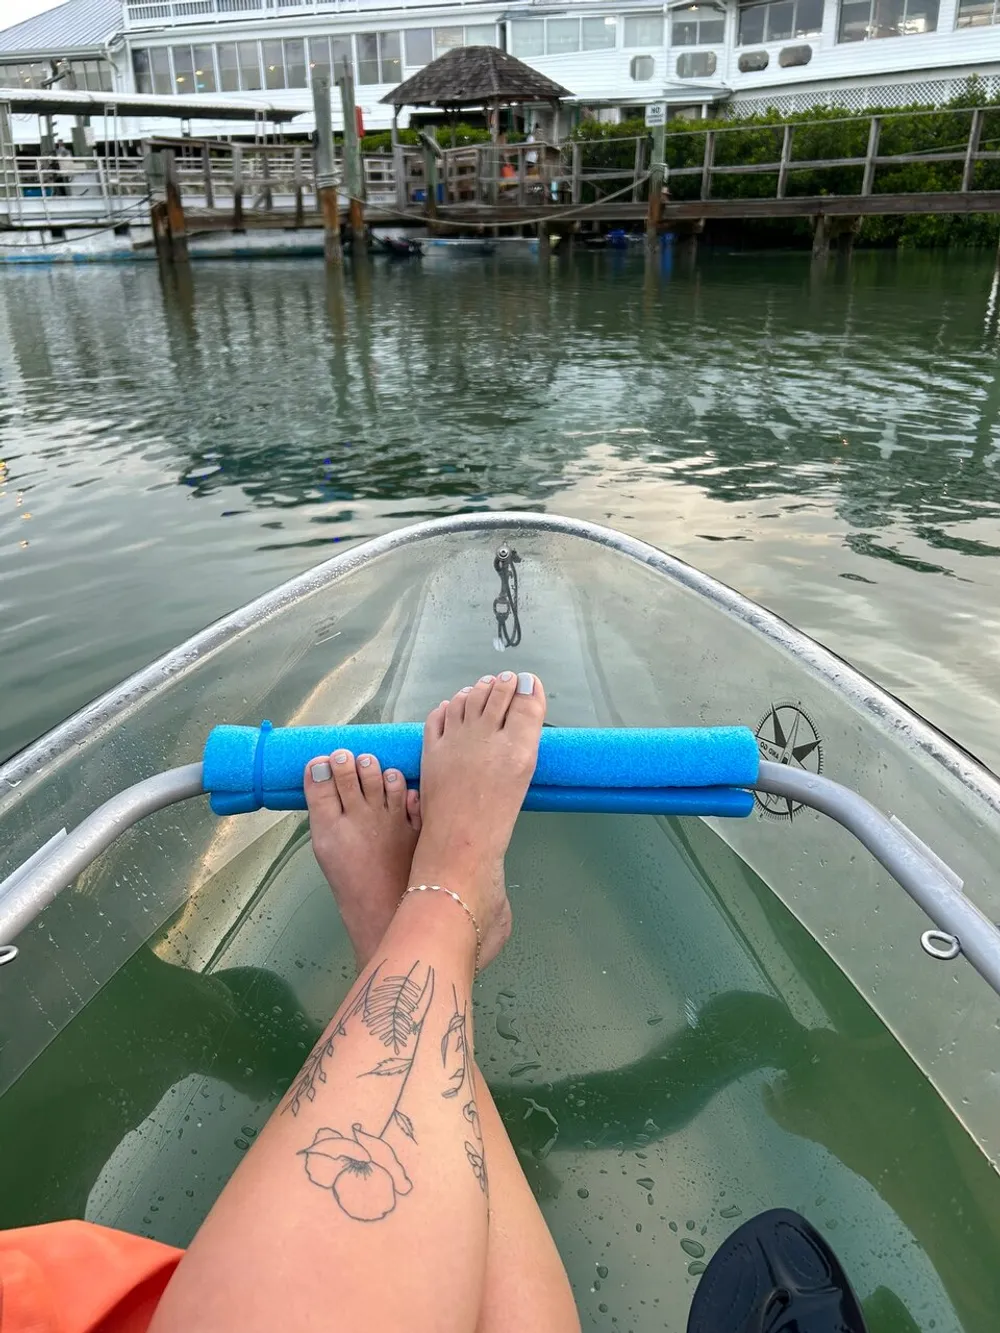 The image shows a persons bare feet resting on a blue foam pool noodle across a kayak with a scenic waterfront and a boat dock in the background